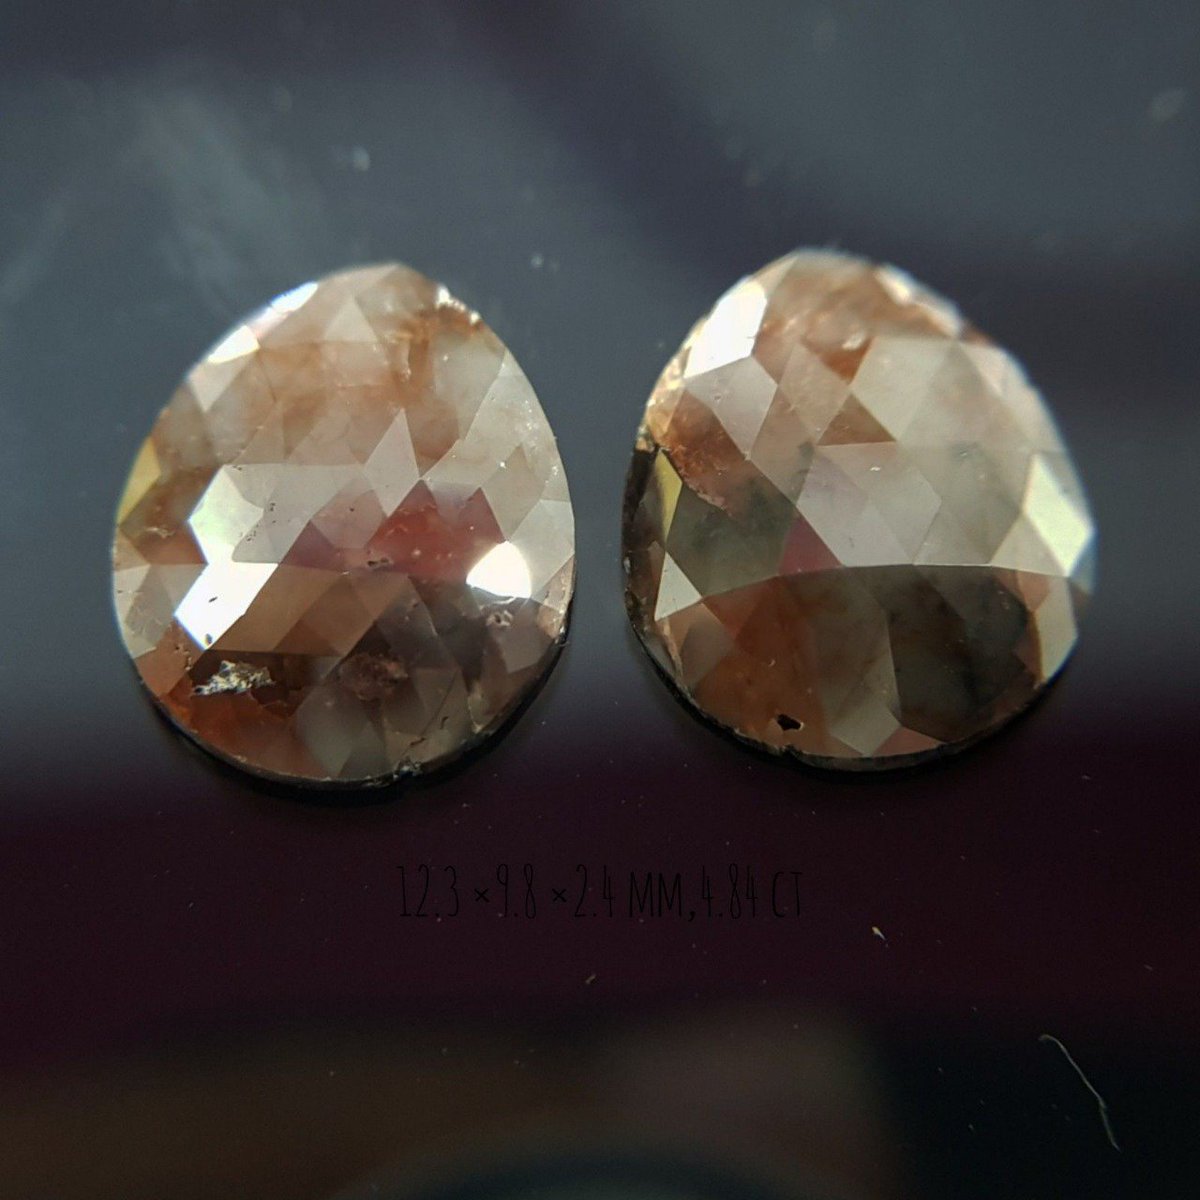 4.84 Ct Natural Fancy Color Pear Shape Loose Diamond Pair For Earring

12.30 X 9.80 X 2.40 MM

henilimpex.com
Email: henilimpex@gmail.com

#pear #naturaldiamond #fancydiamonds #earrings #loosediamond #conflictfreediamonds #colordiamonds #diamondpair !!! Price for DM !!!!